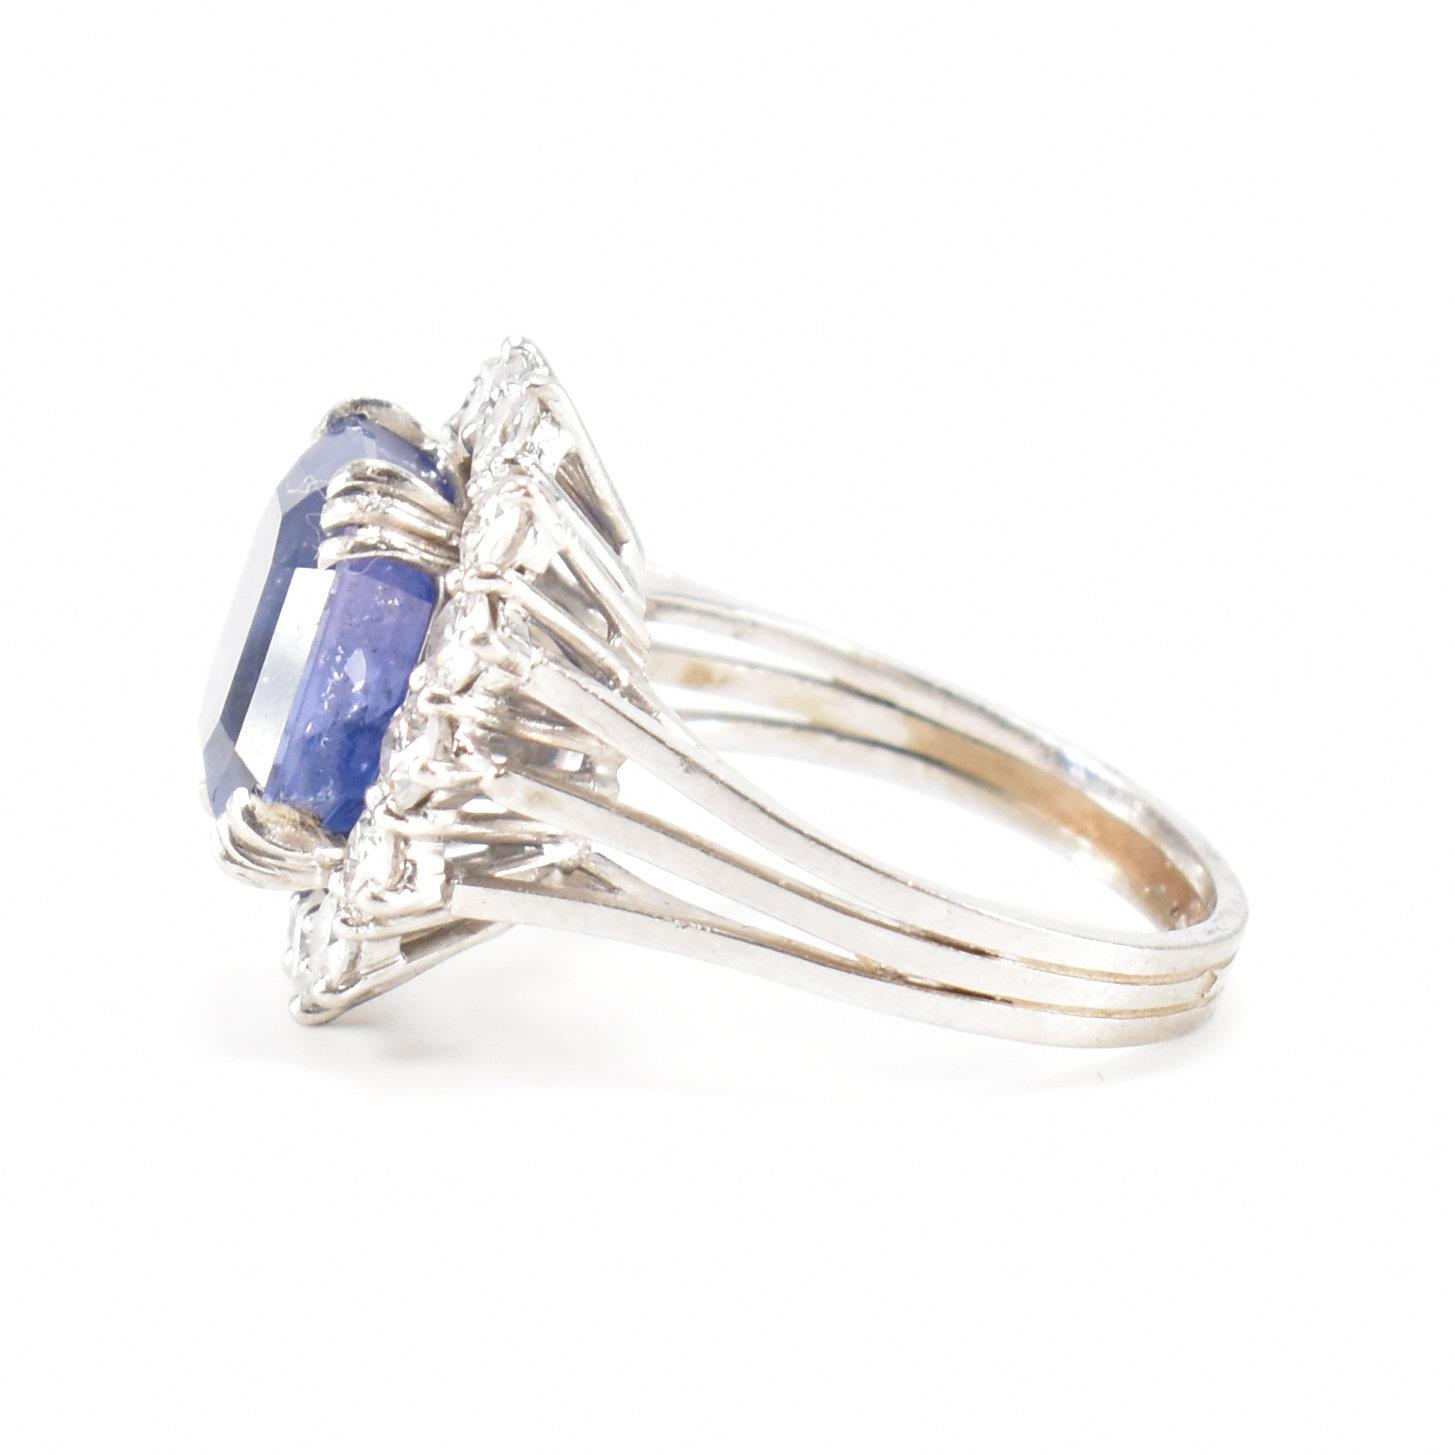 FRENCH CEYLON COLOUR CHANGE SAPPHIRE & DIAMOND CLUSTER RING - Image 2 of 9